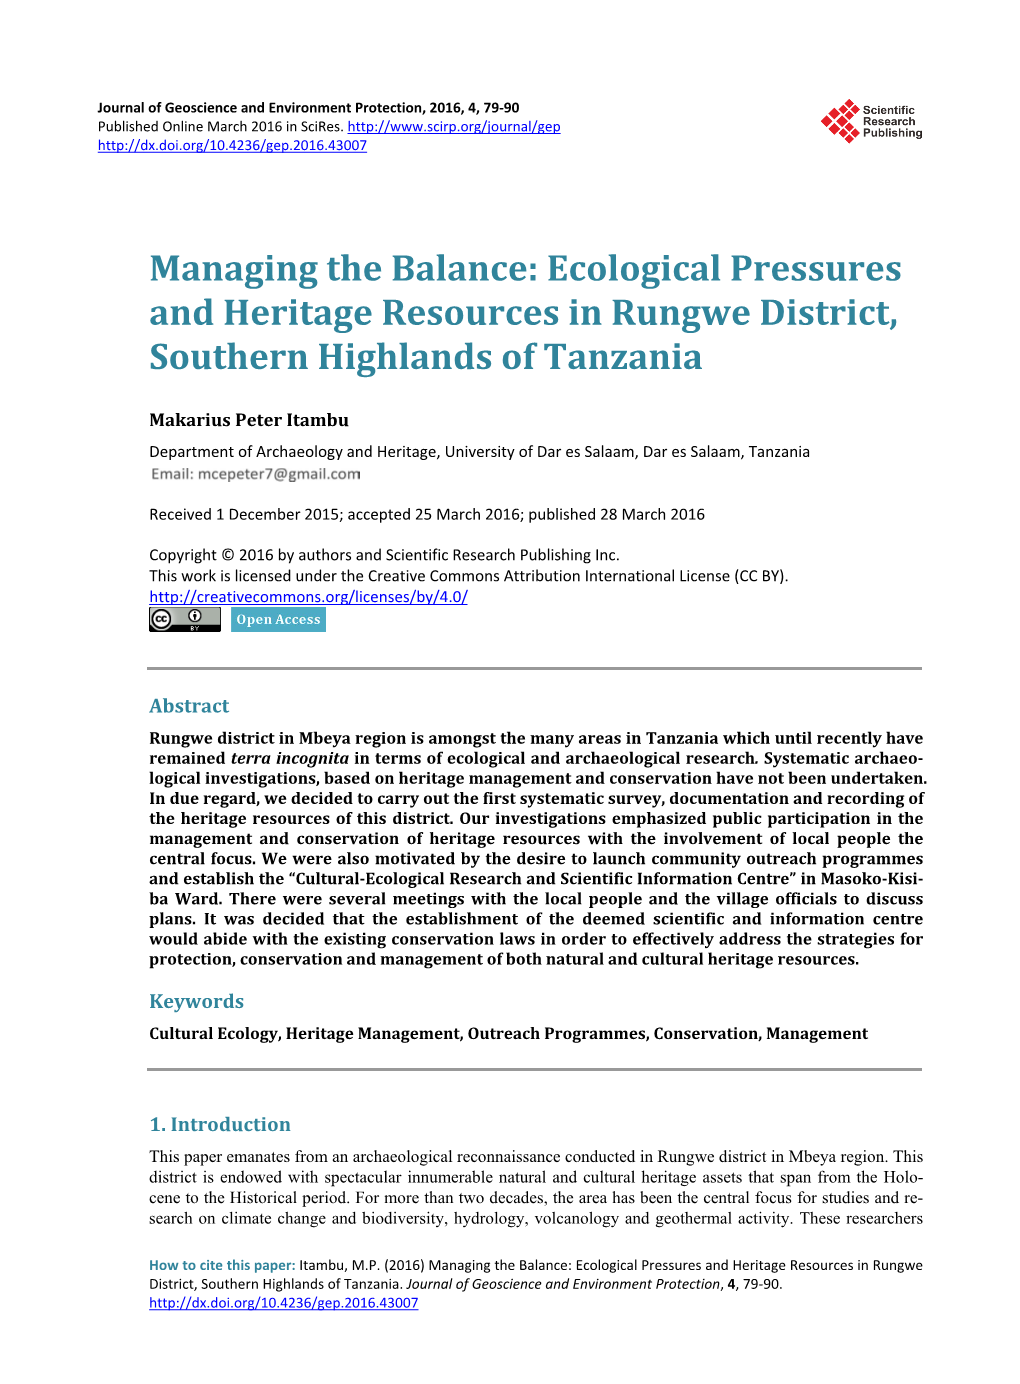 Ecological Pressures and Heritage Resources in Rungwe District, Southern Highlands of Tanzania